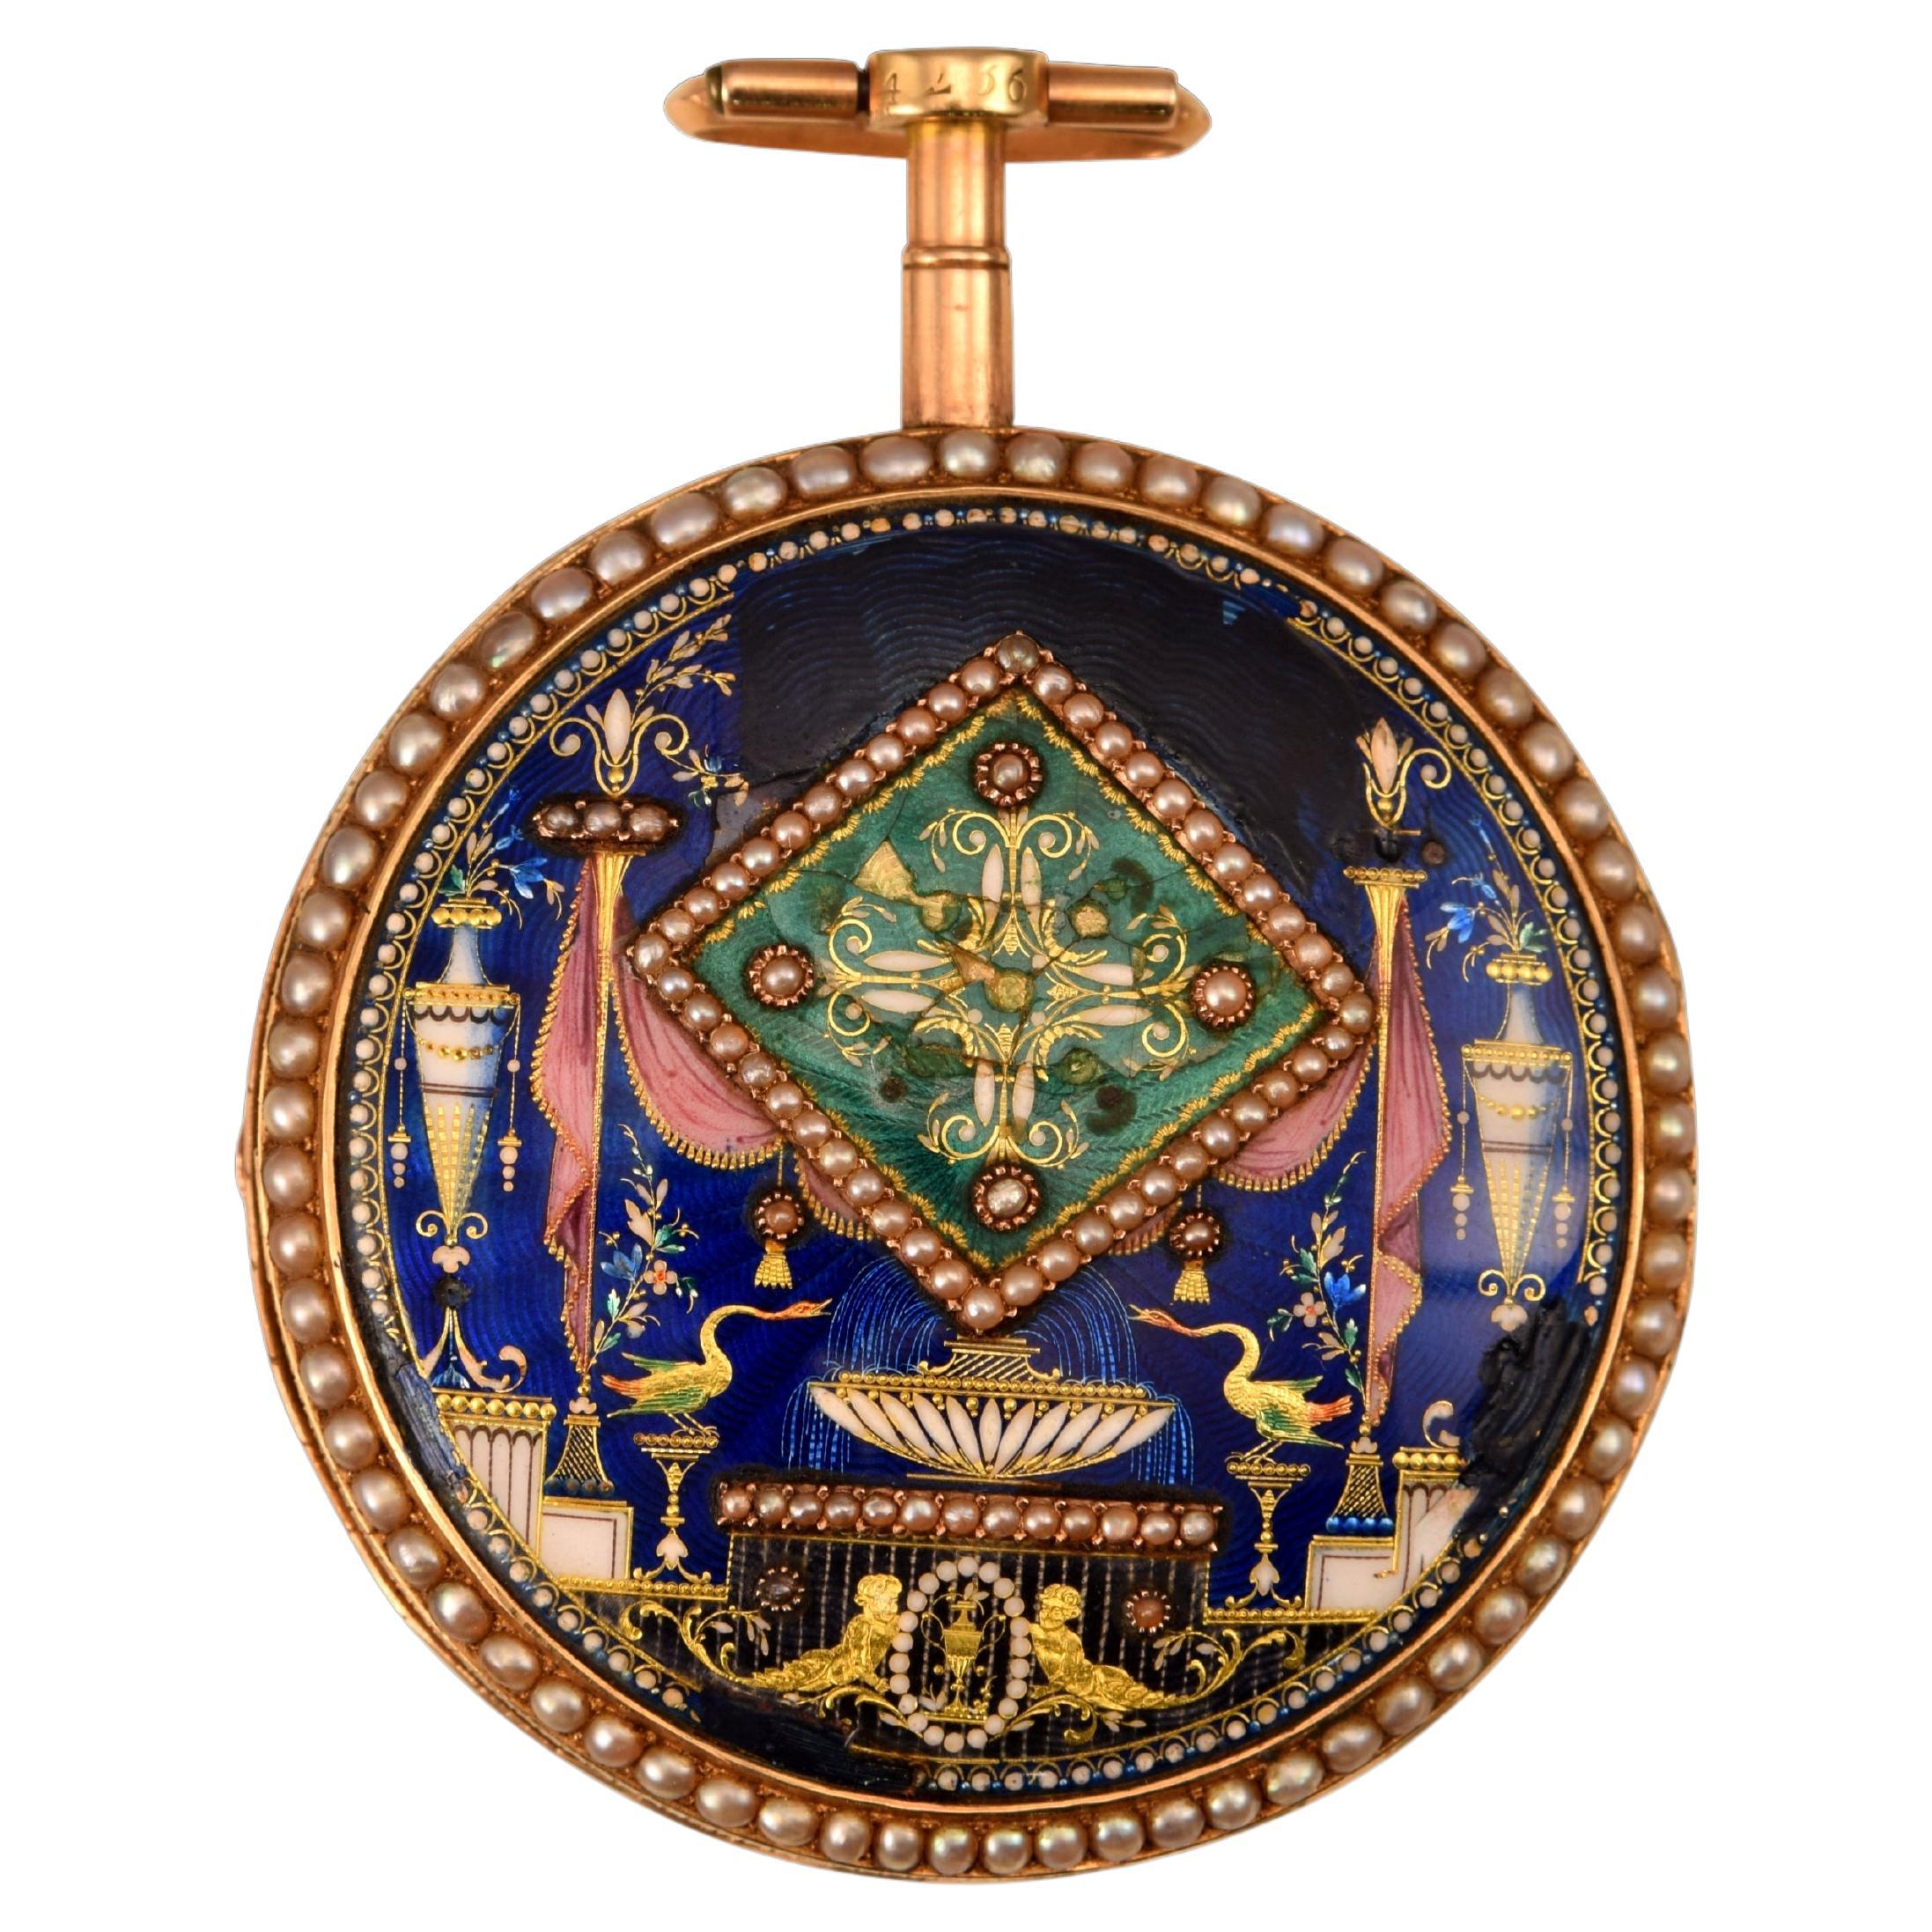 Pocket Watch, Jaqs Blanc, Gold, Enamel, Etc. Possibly ca Late 18th C For Sale